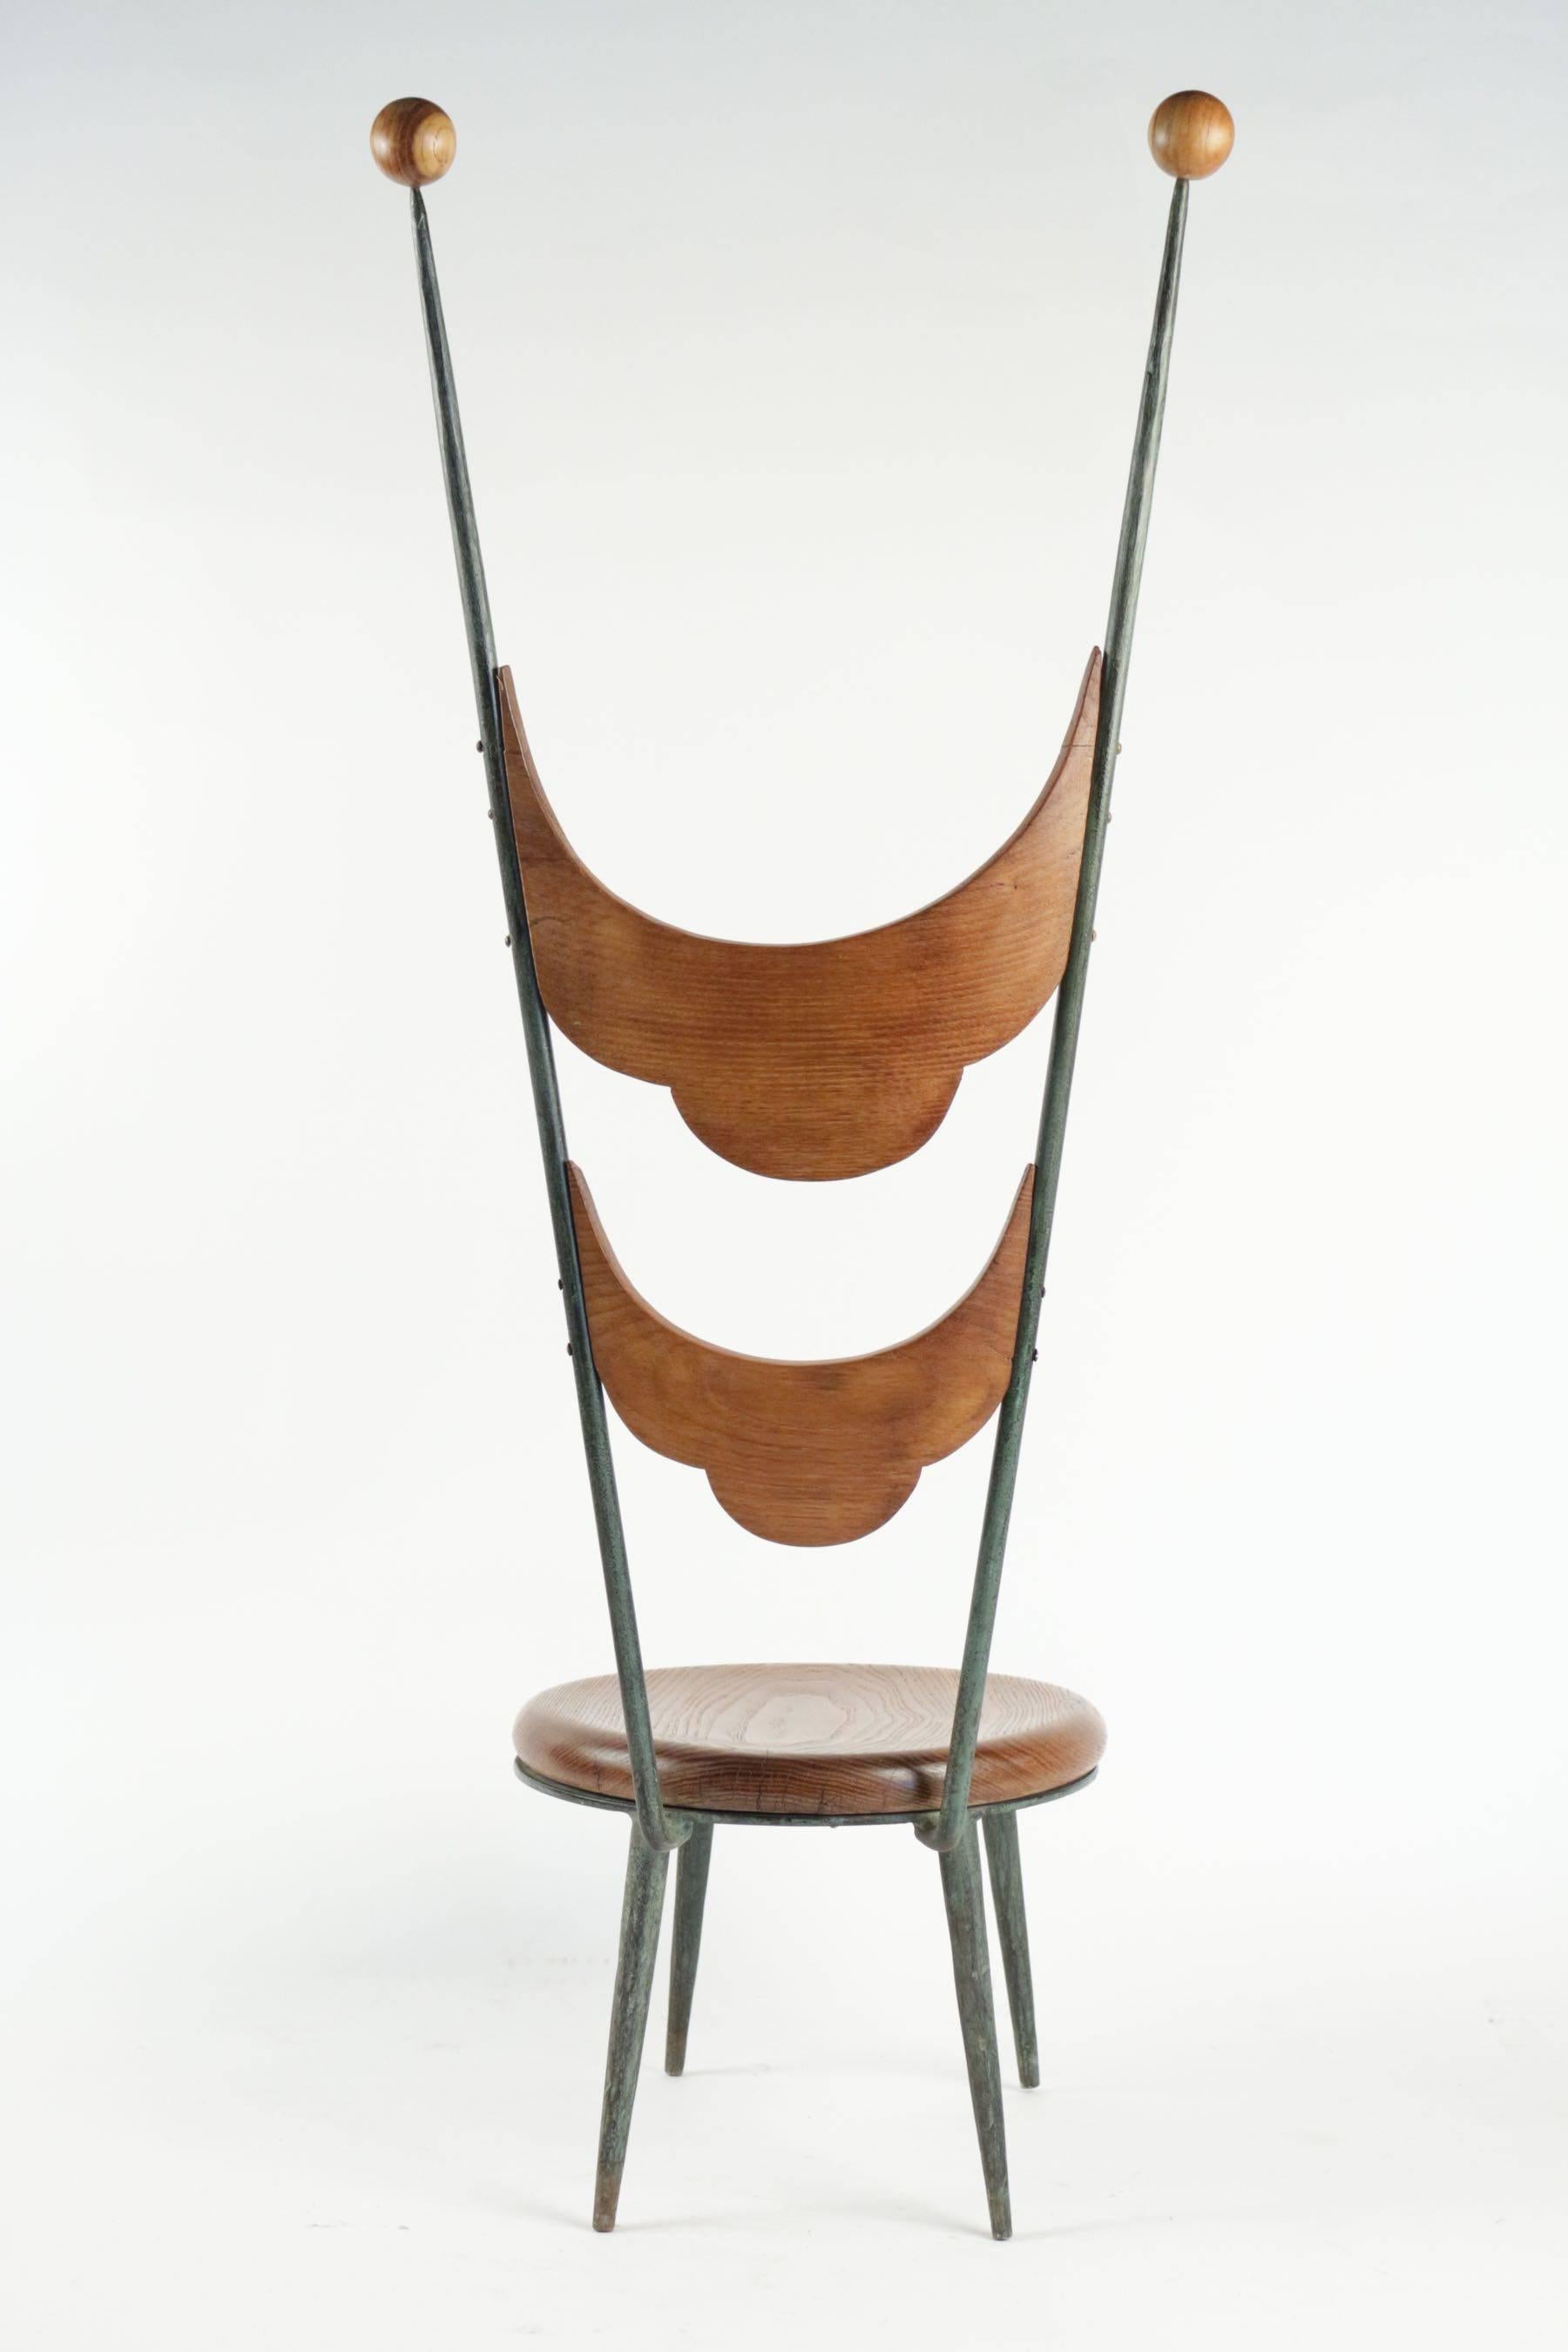 1920s Wood and Iron Low Chair by Sante Mingazzi 3